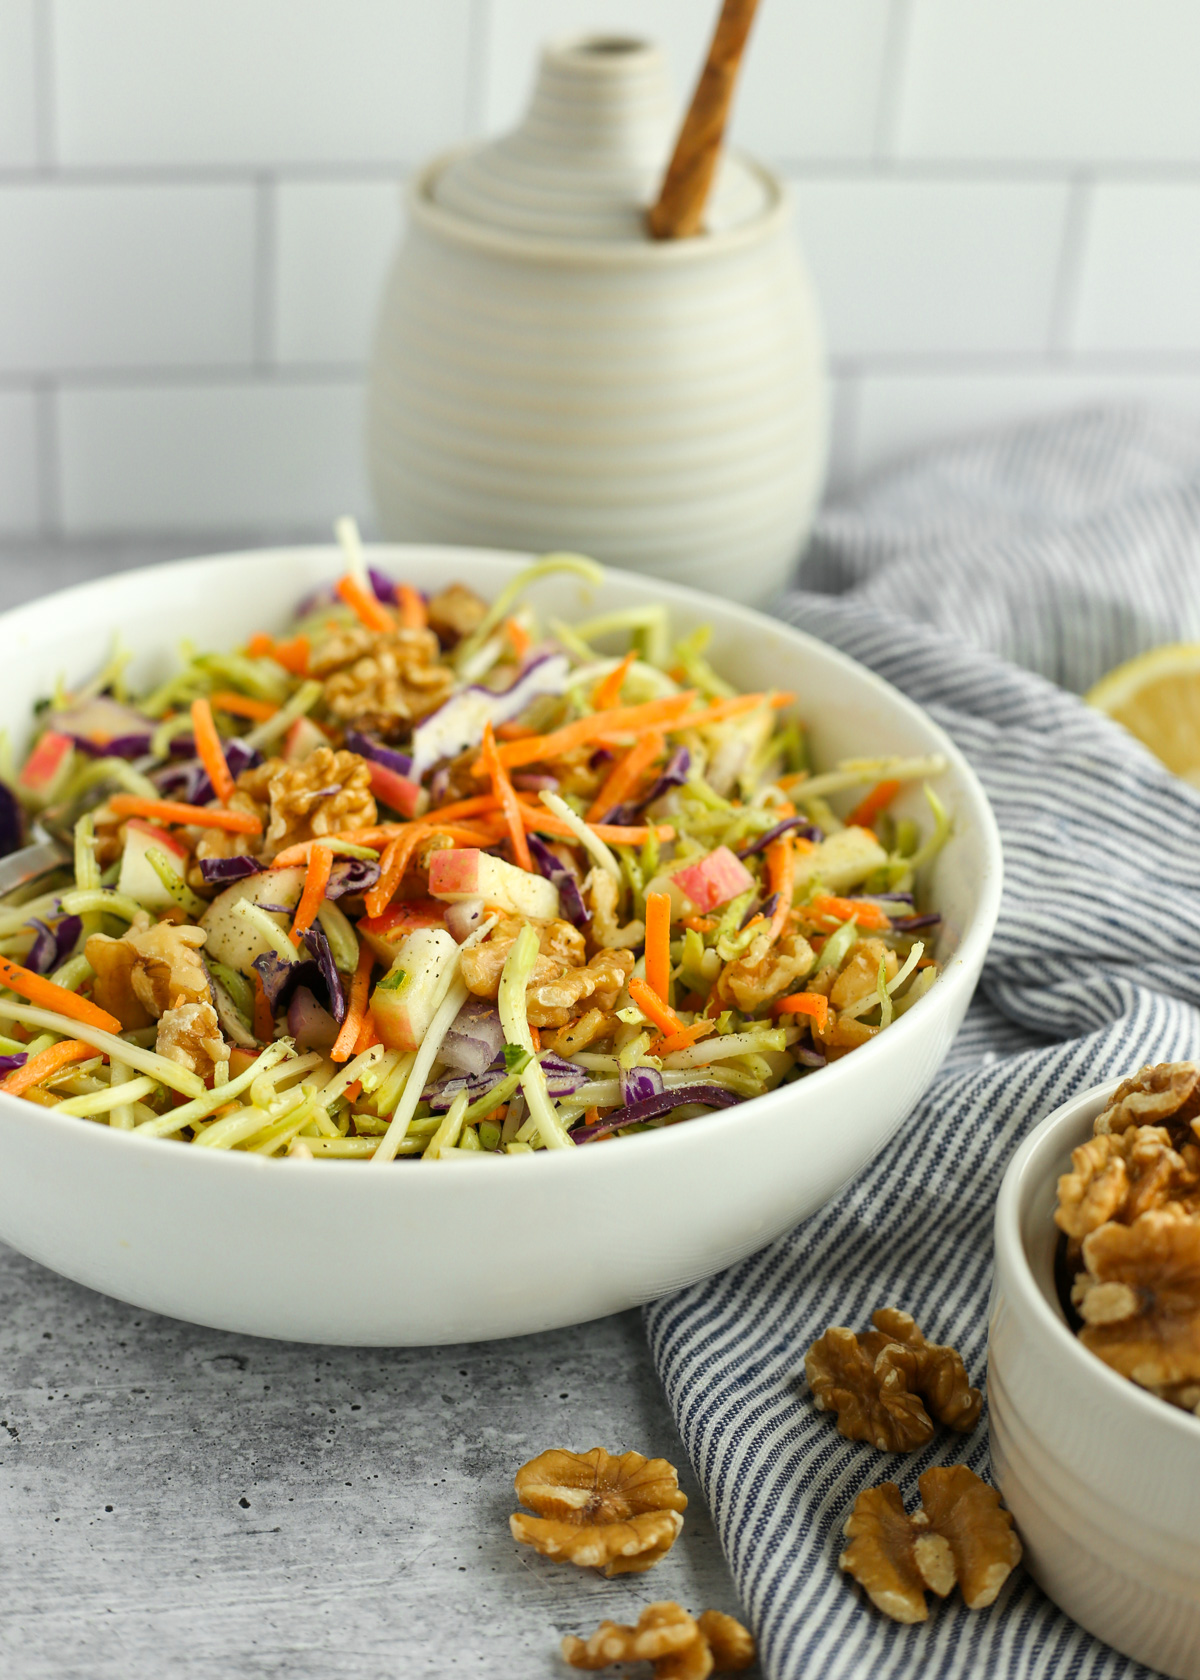 Angled view of a kitchen scene with a white serving bowl filled with a salad made from broccoli slaw, shredded carrots and red cabbage, walnuts, and diced apples, with additional ingredients and a blue and white striped dish towel arranged in the background